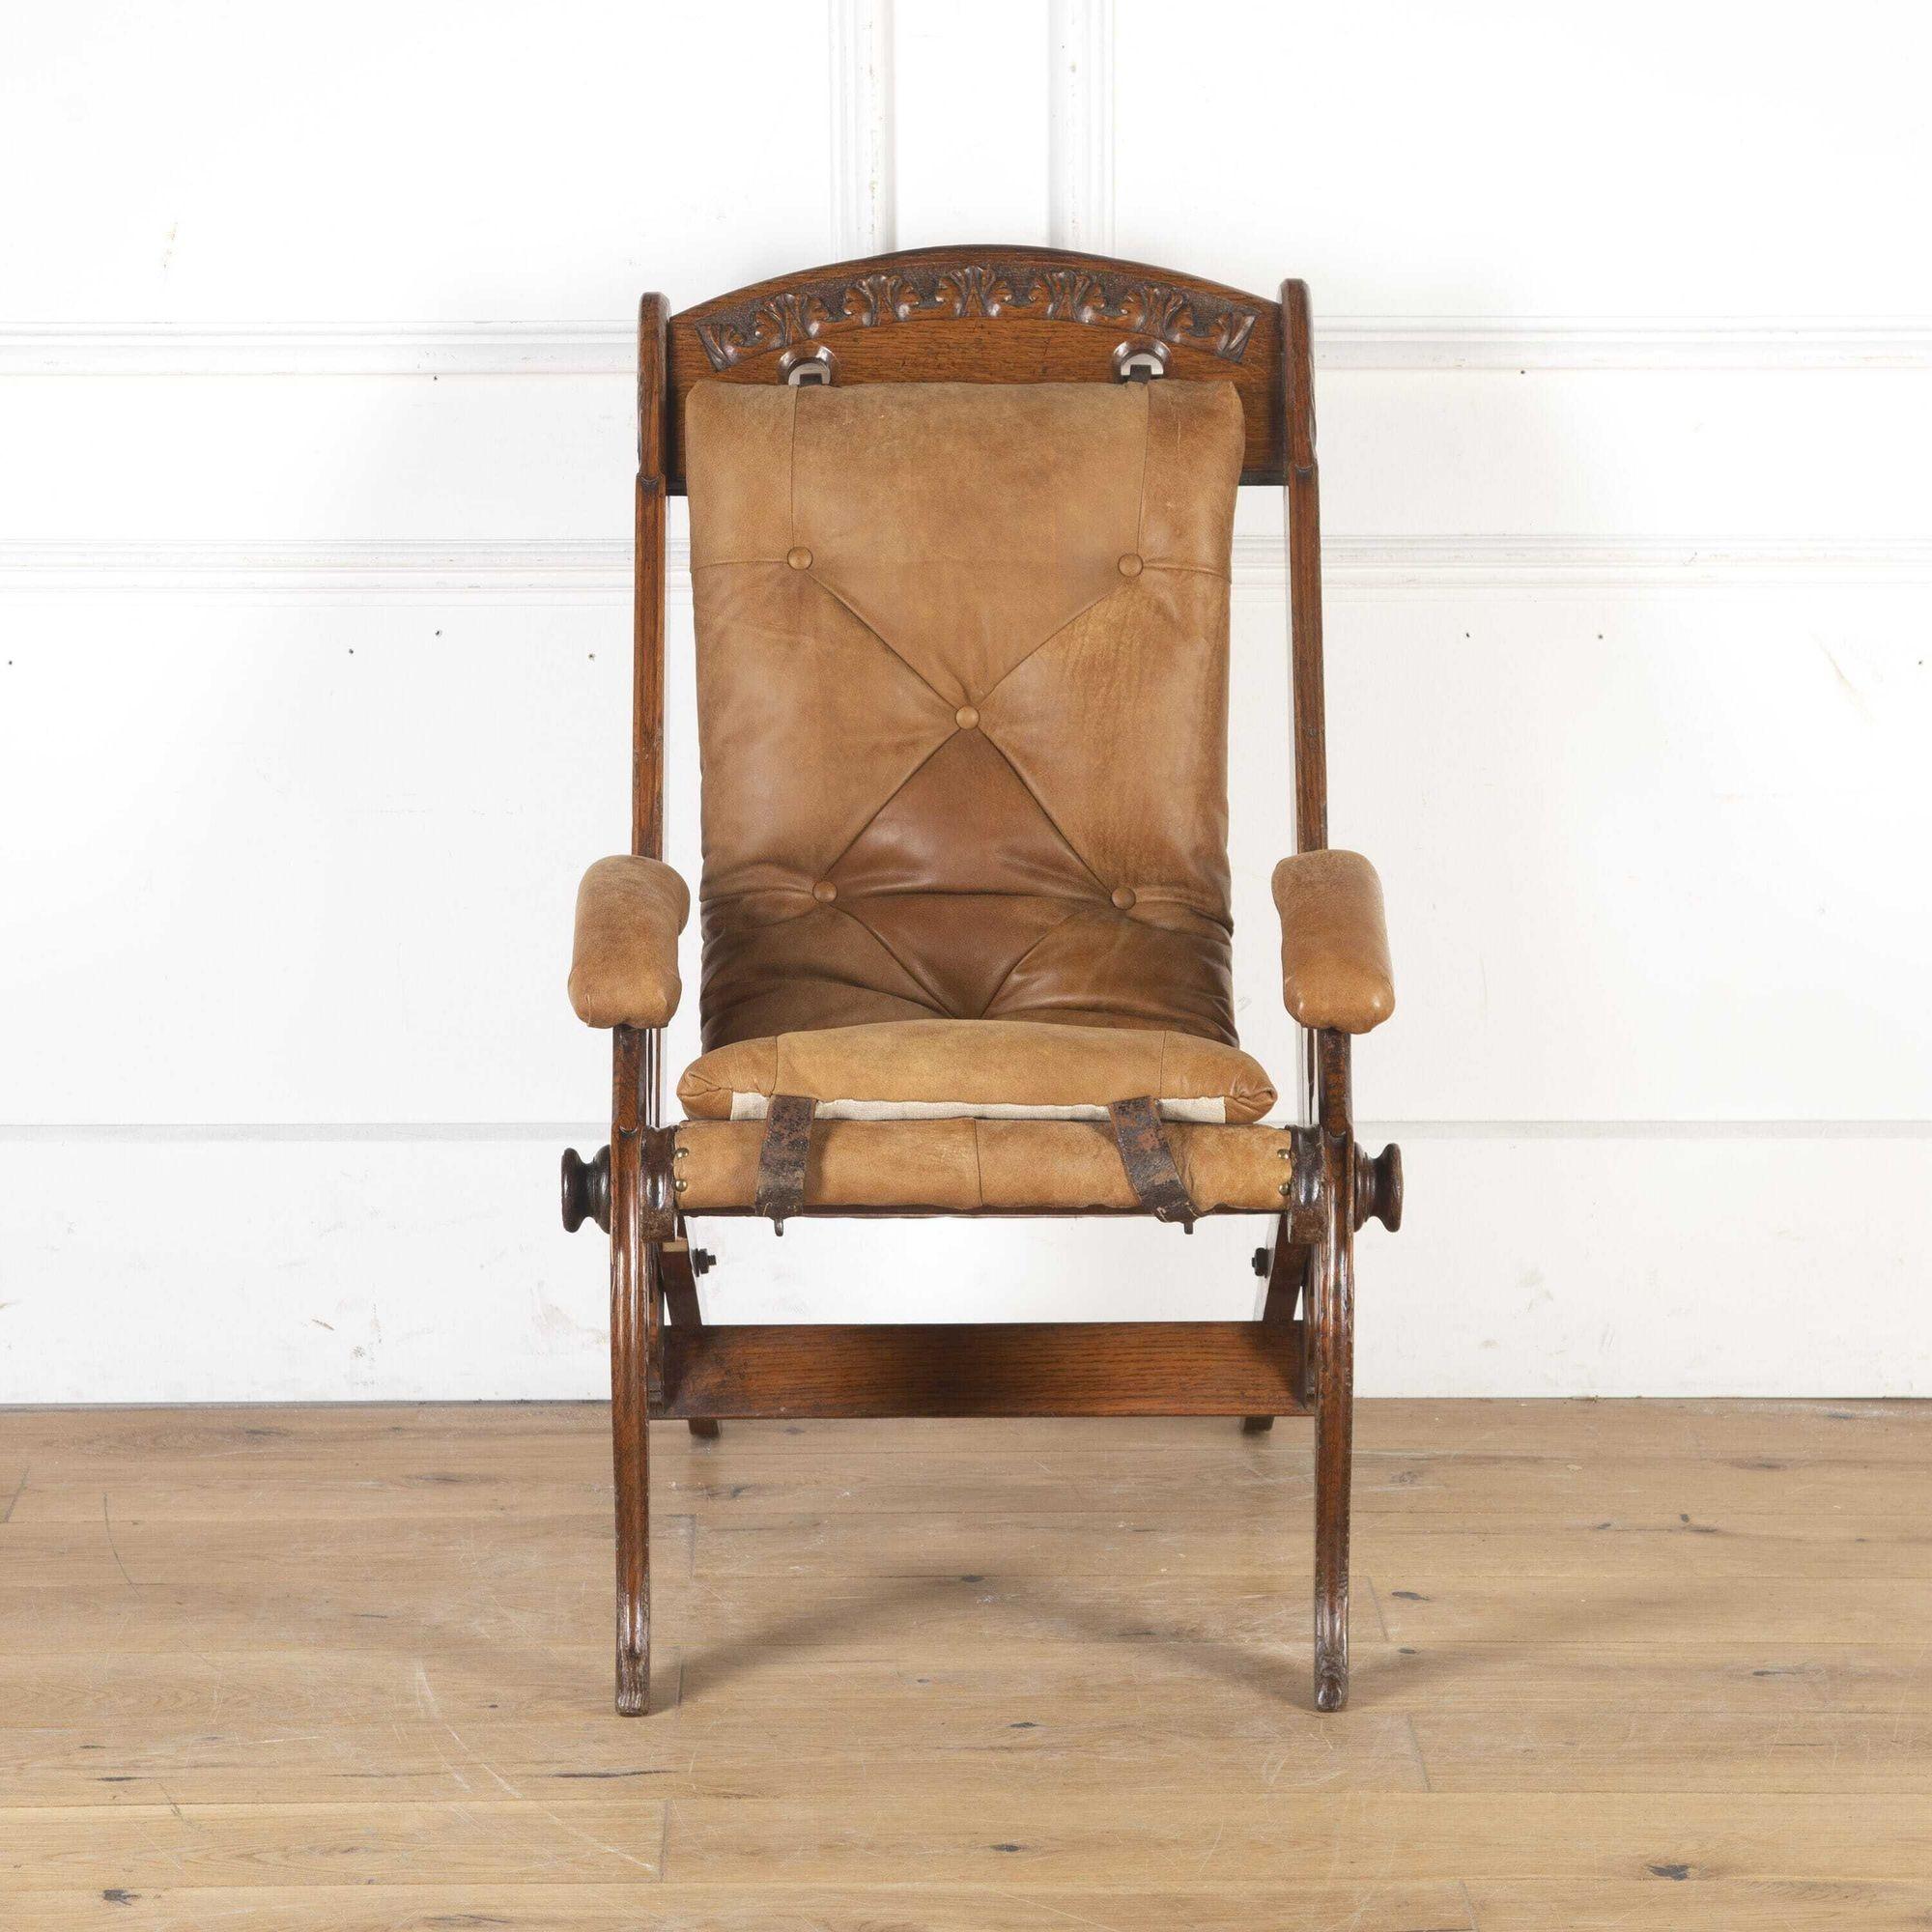 19th Century oak folding and reclining colonial campaign chair. 
This chair was designed for comfort, with a buff leather slung seat and leather padded arms. The original design is attributed to J. Herbert McNair, who was part of the Glasgow group